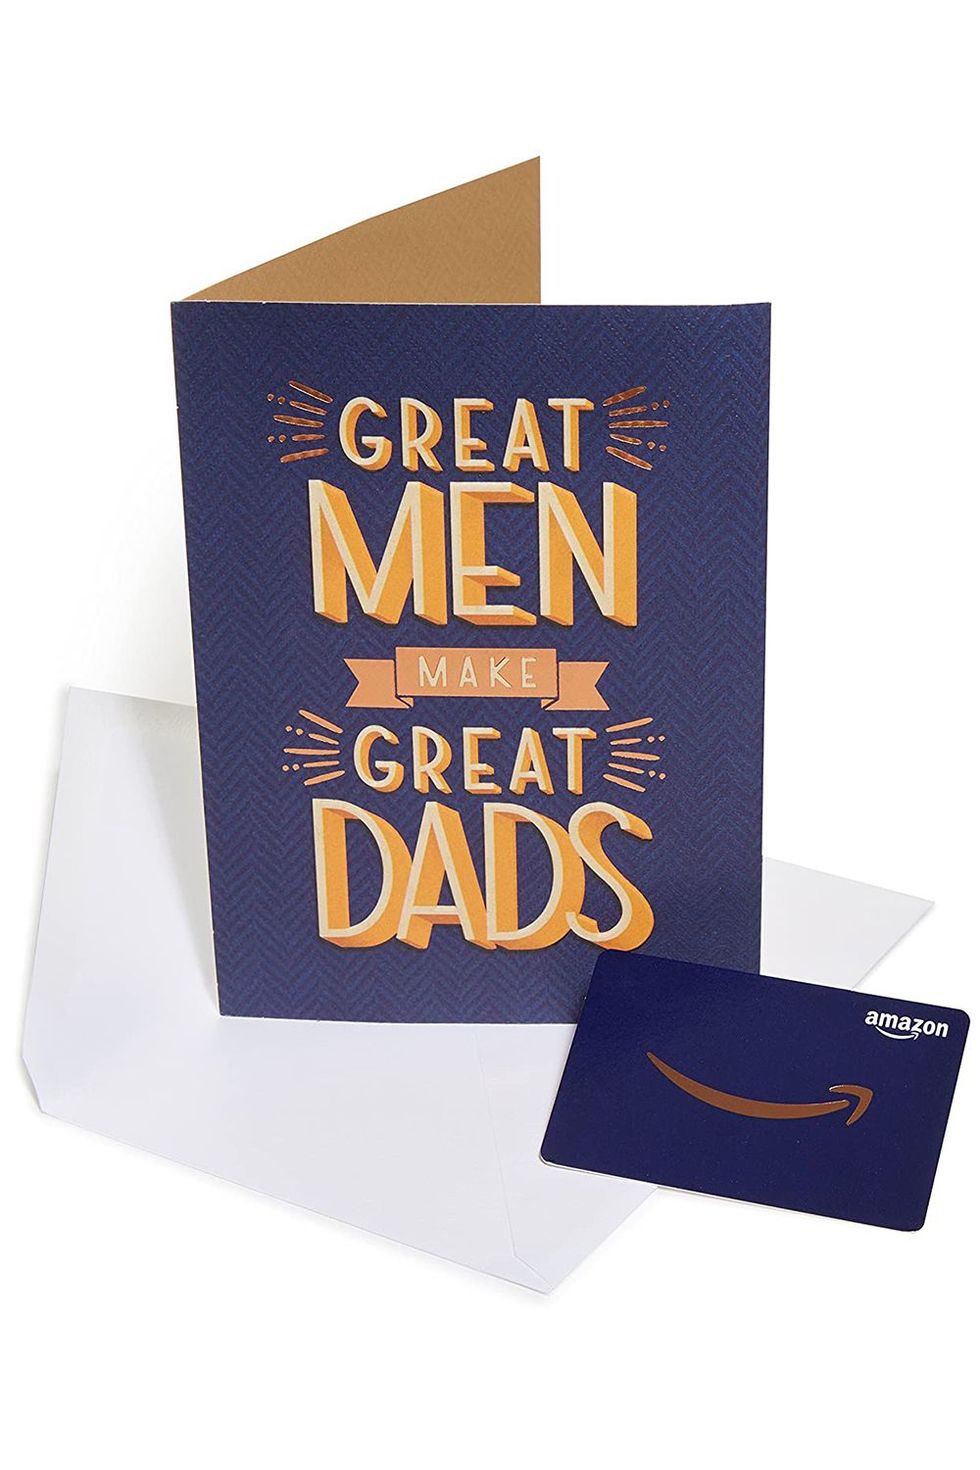 35 Best Father-Son Gifts 2021 - Unique Father's Day Gifts from Son